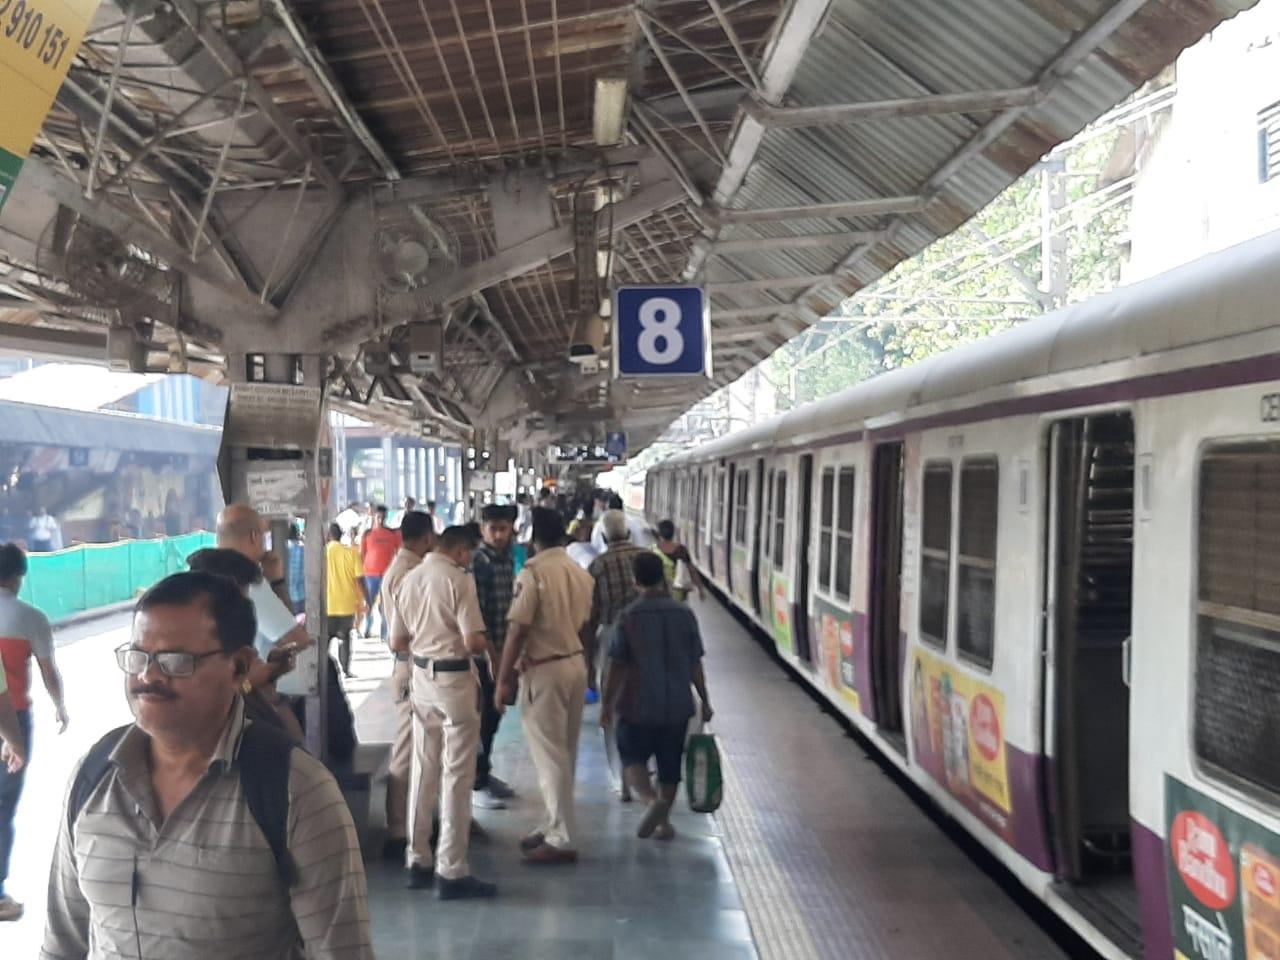 Dadar station, a bustling hub for commuters, records a daily footfall of nearly 500,000 passengers